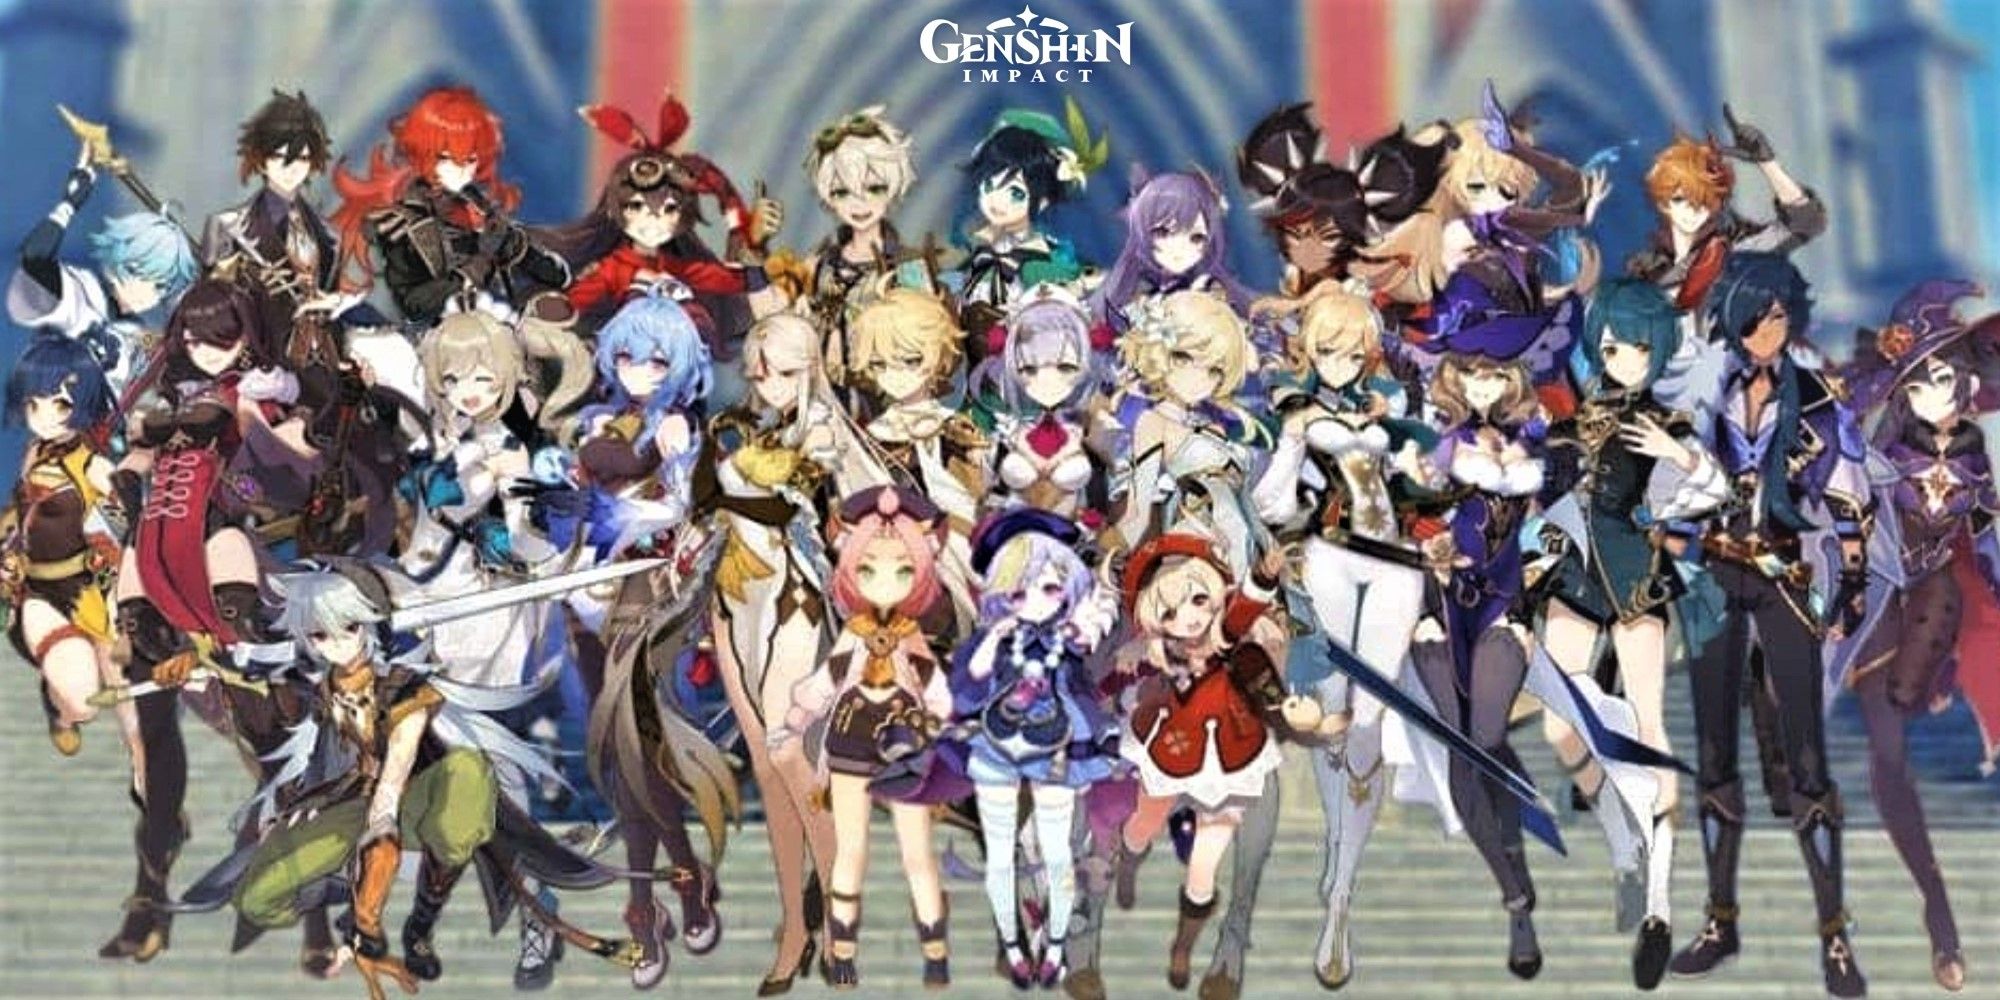 Multiple characters from Genshin Impact posing together